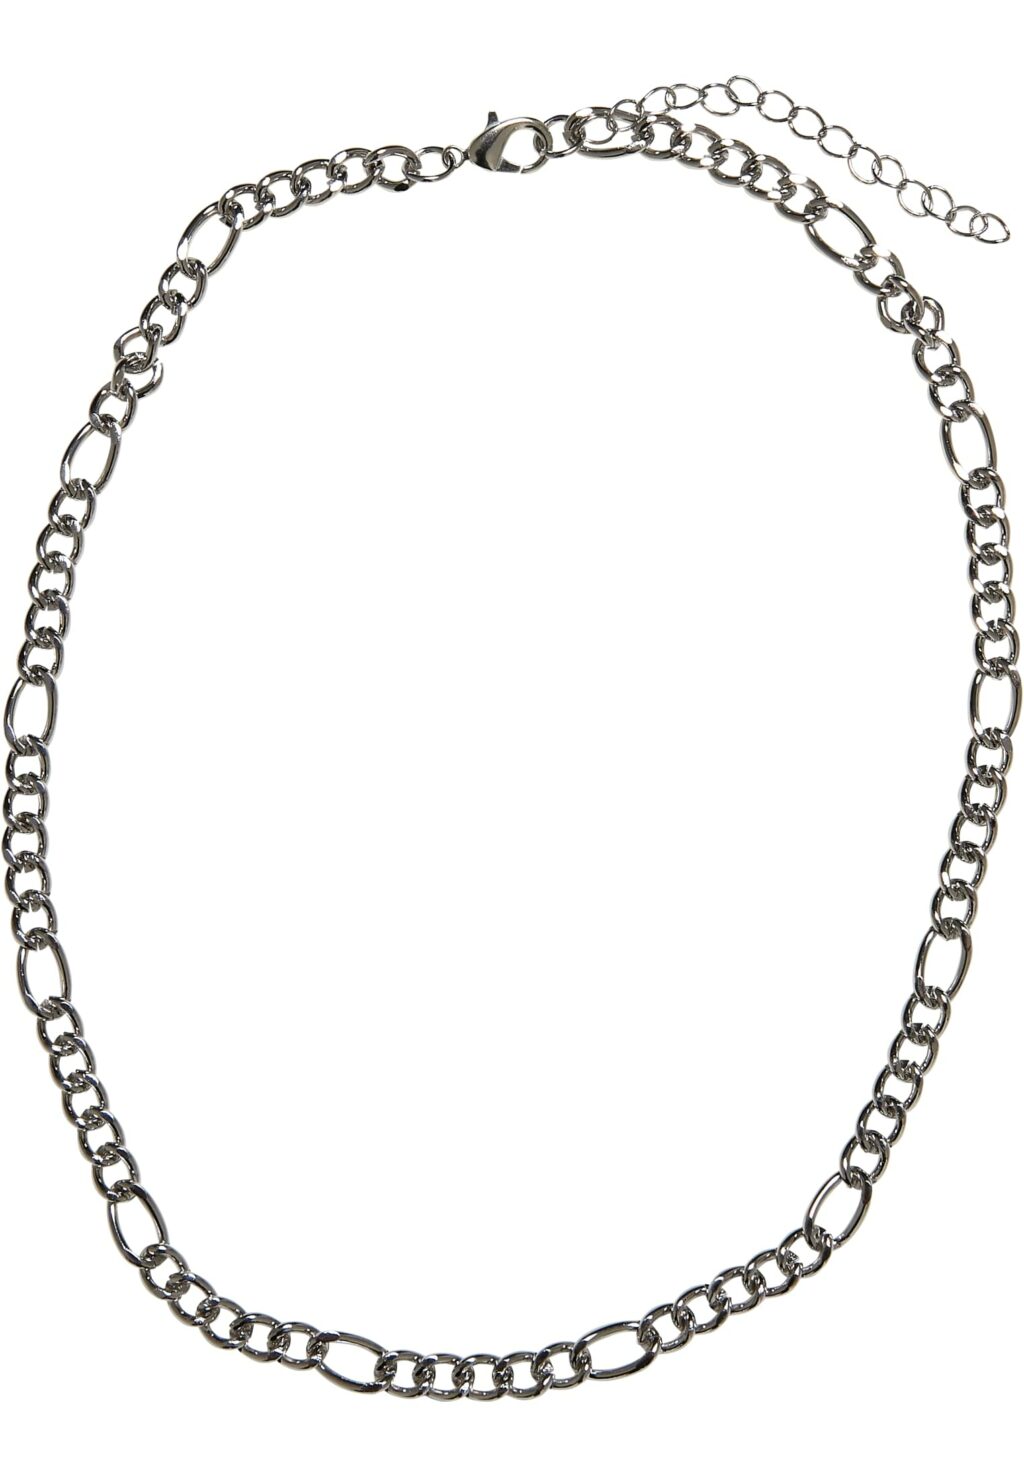 Zenit Basic Necklace silver one TB5634